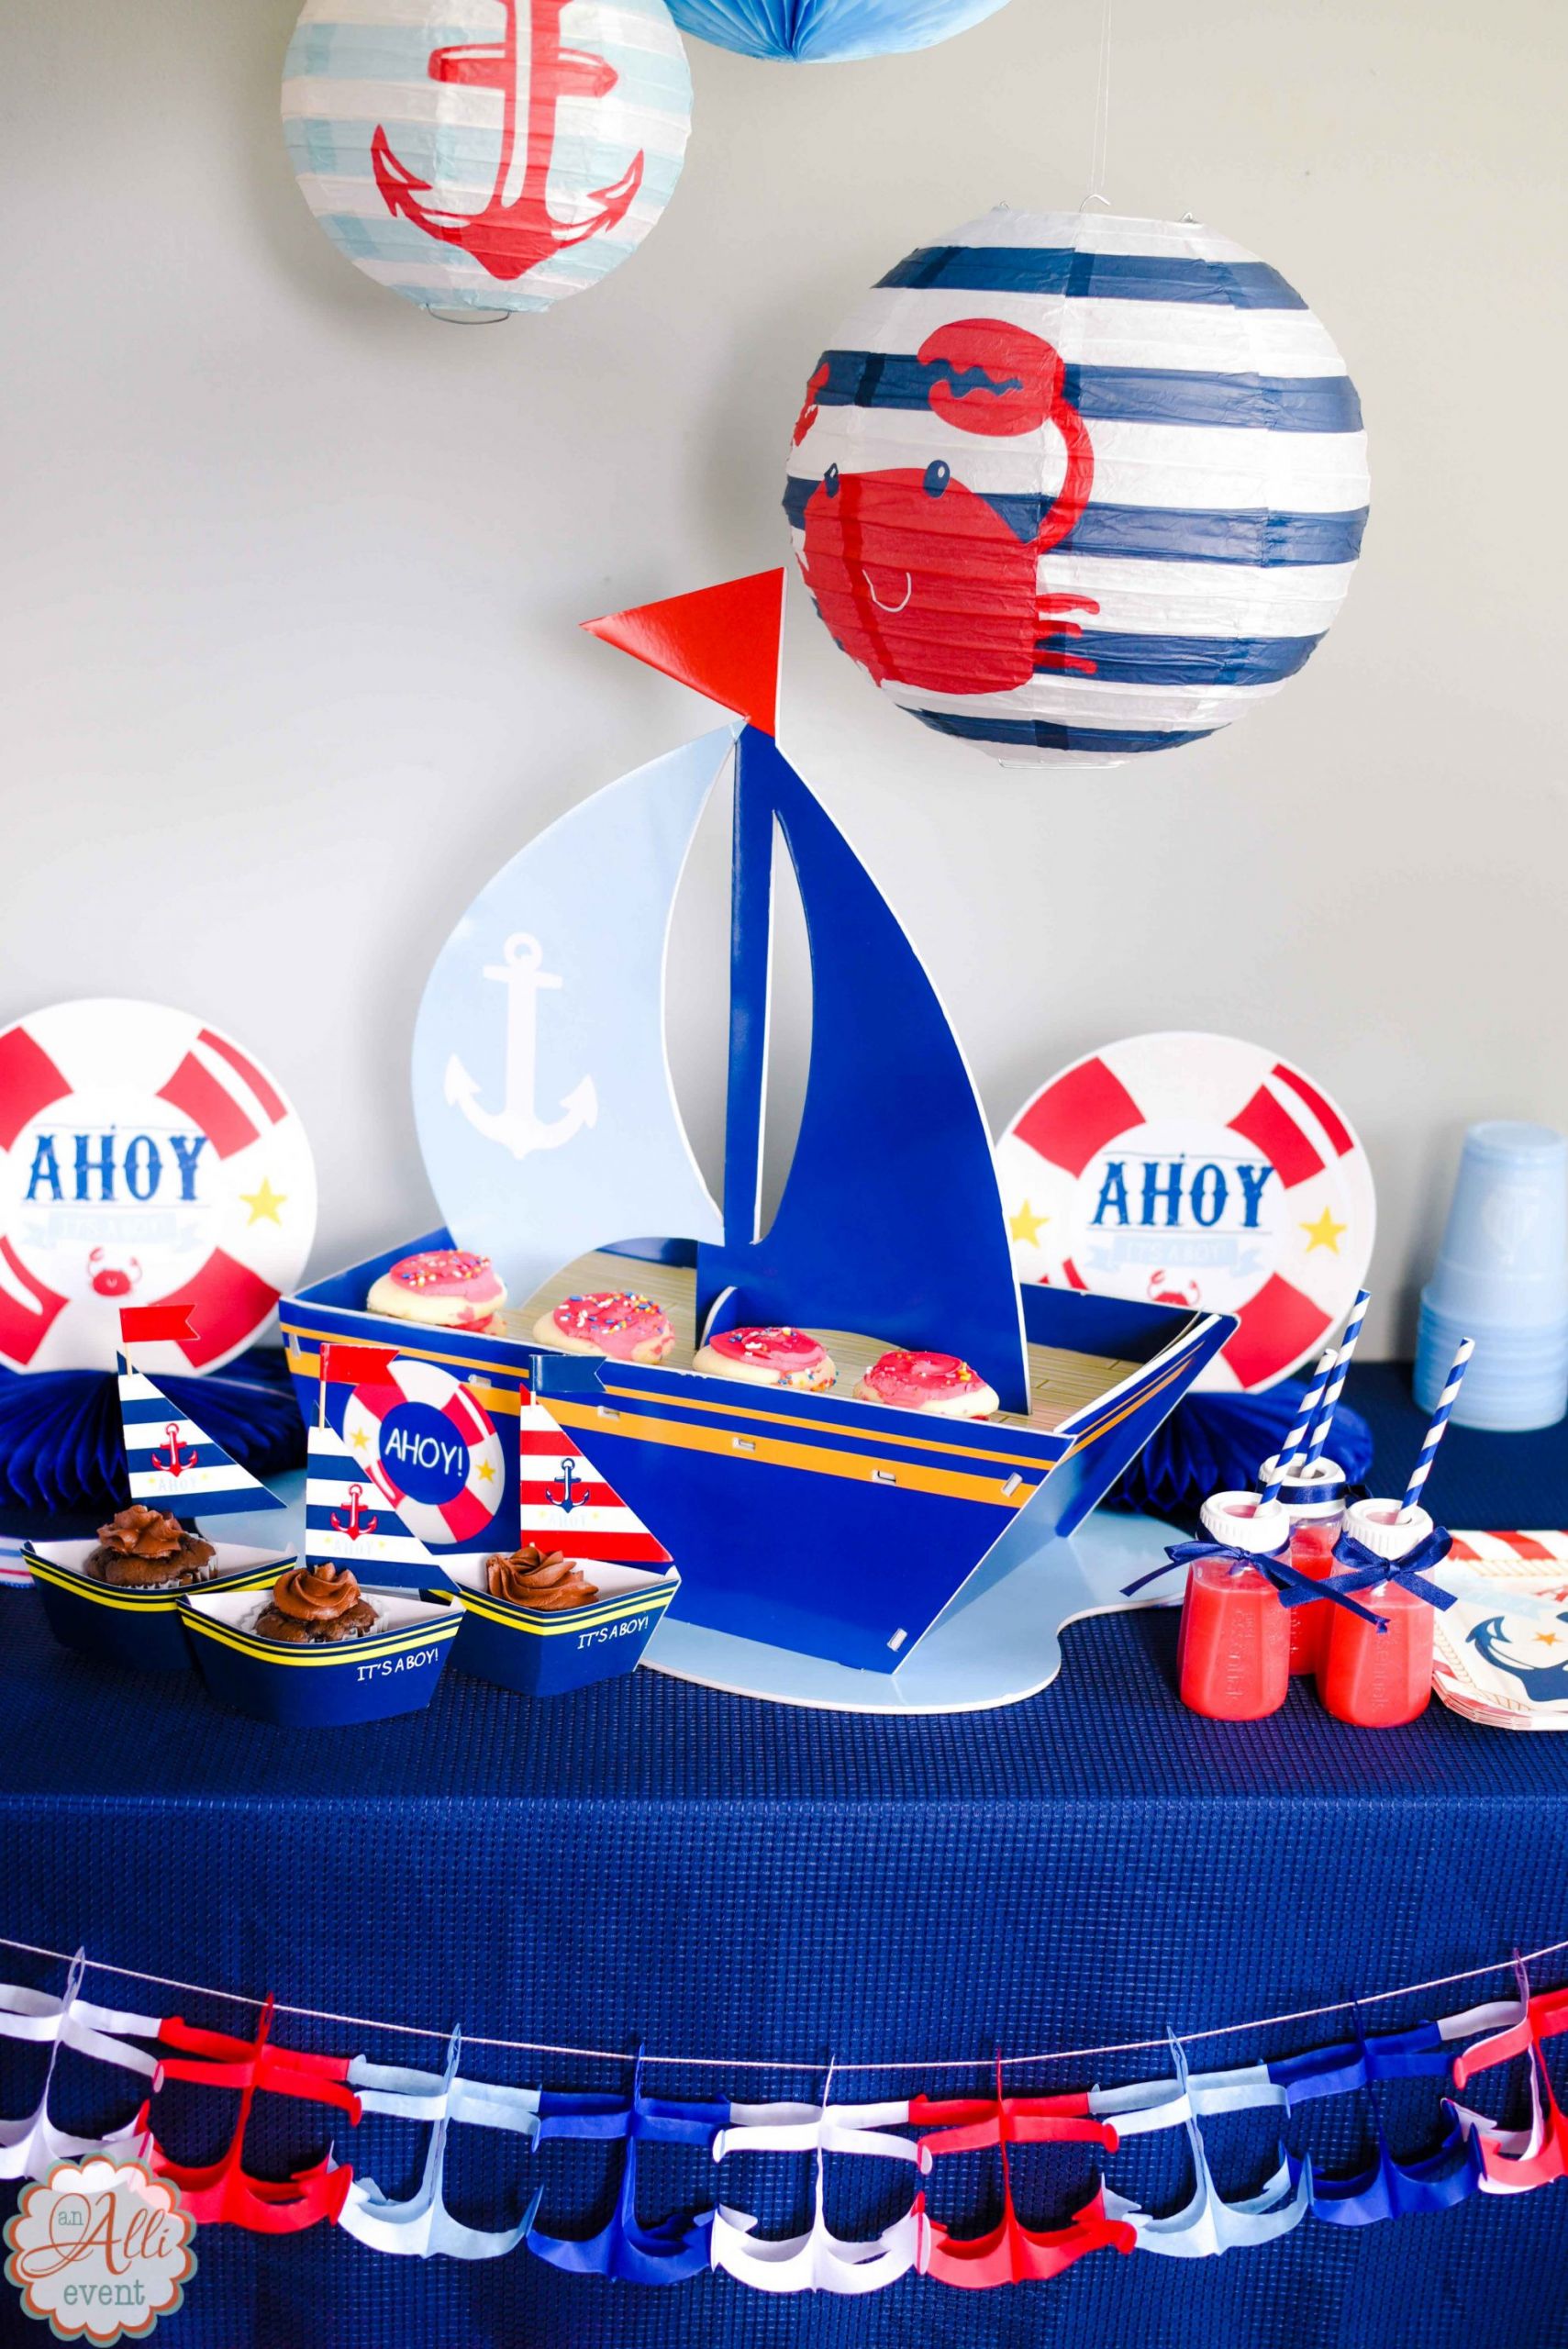 Nautical Decor Baby Shower
 How to Host an Adorable Nautical Baby Shower An Alli Event